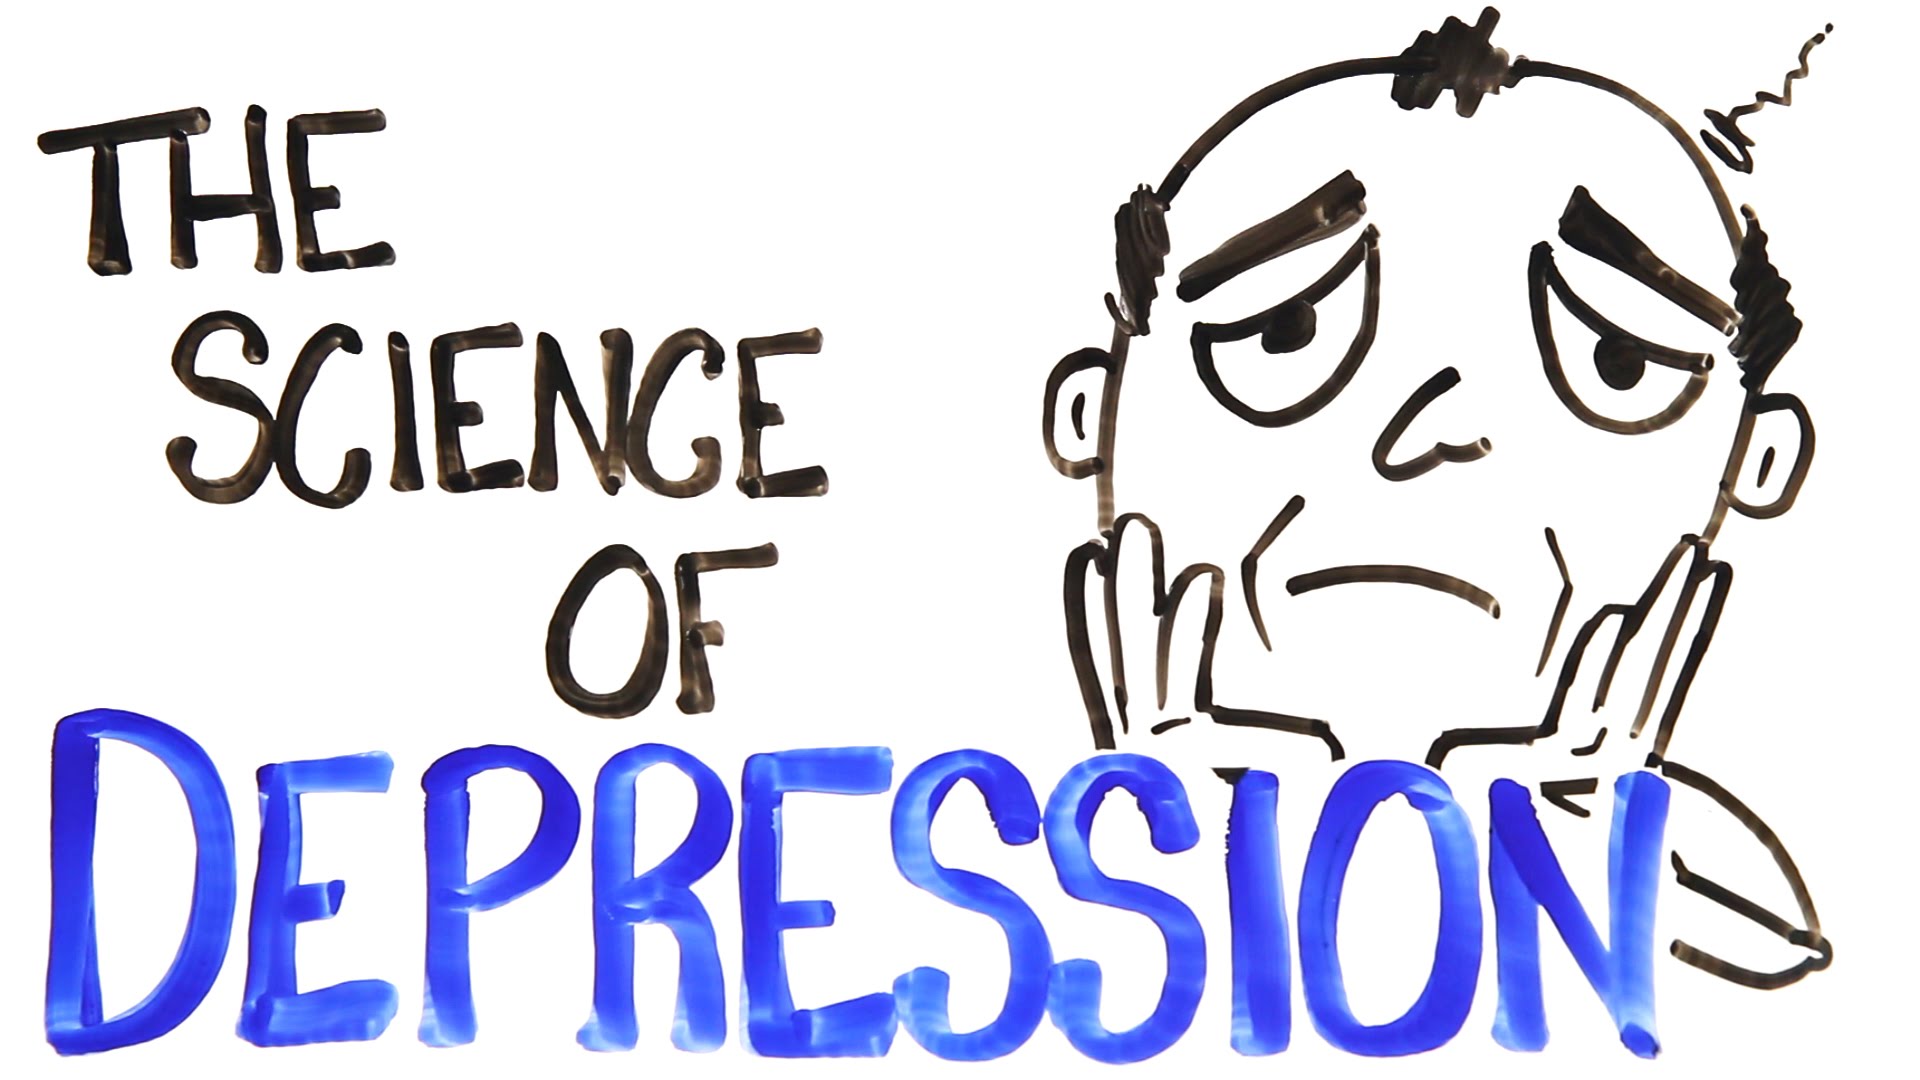 The Science of Depression - Brain Pump